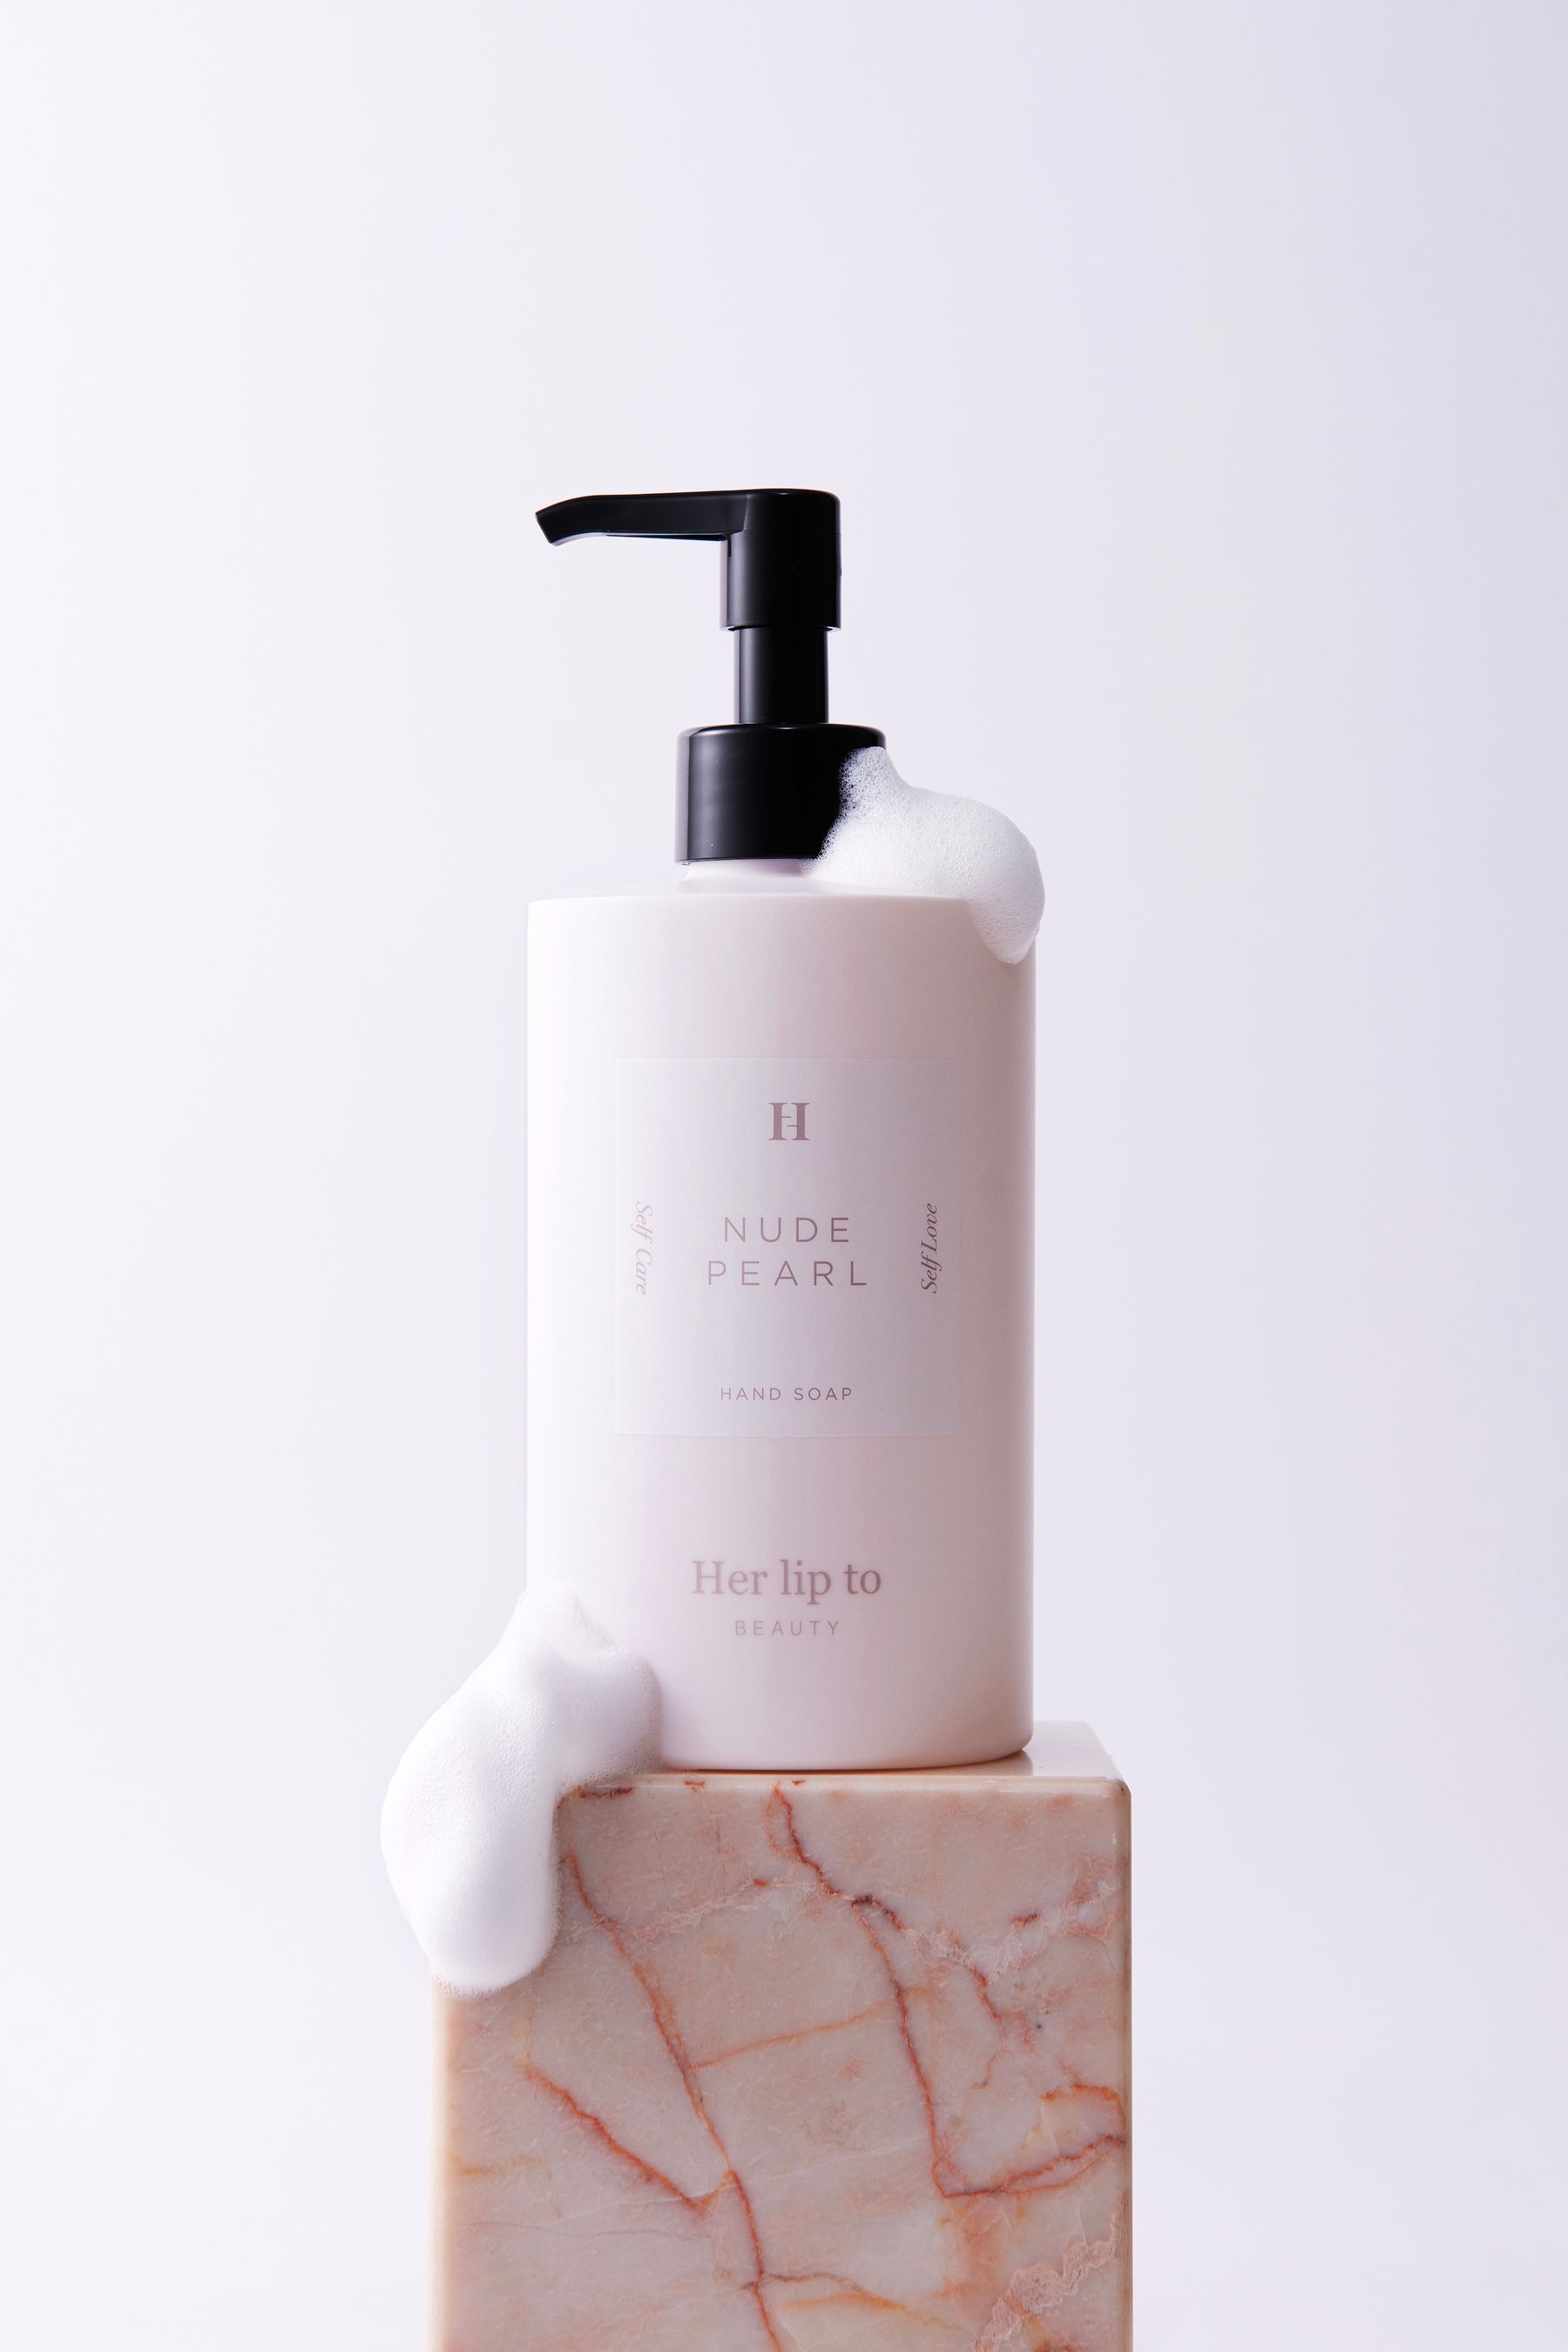 [Shipping in early August] BEAUTY HAND SOAP - NUDE PEARL -